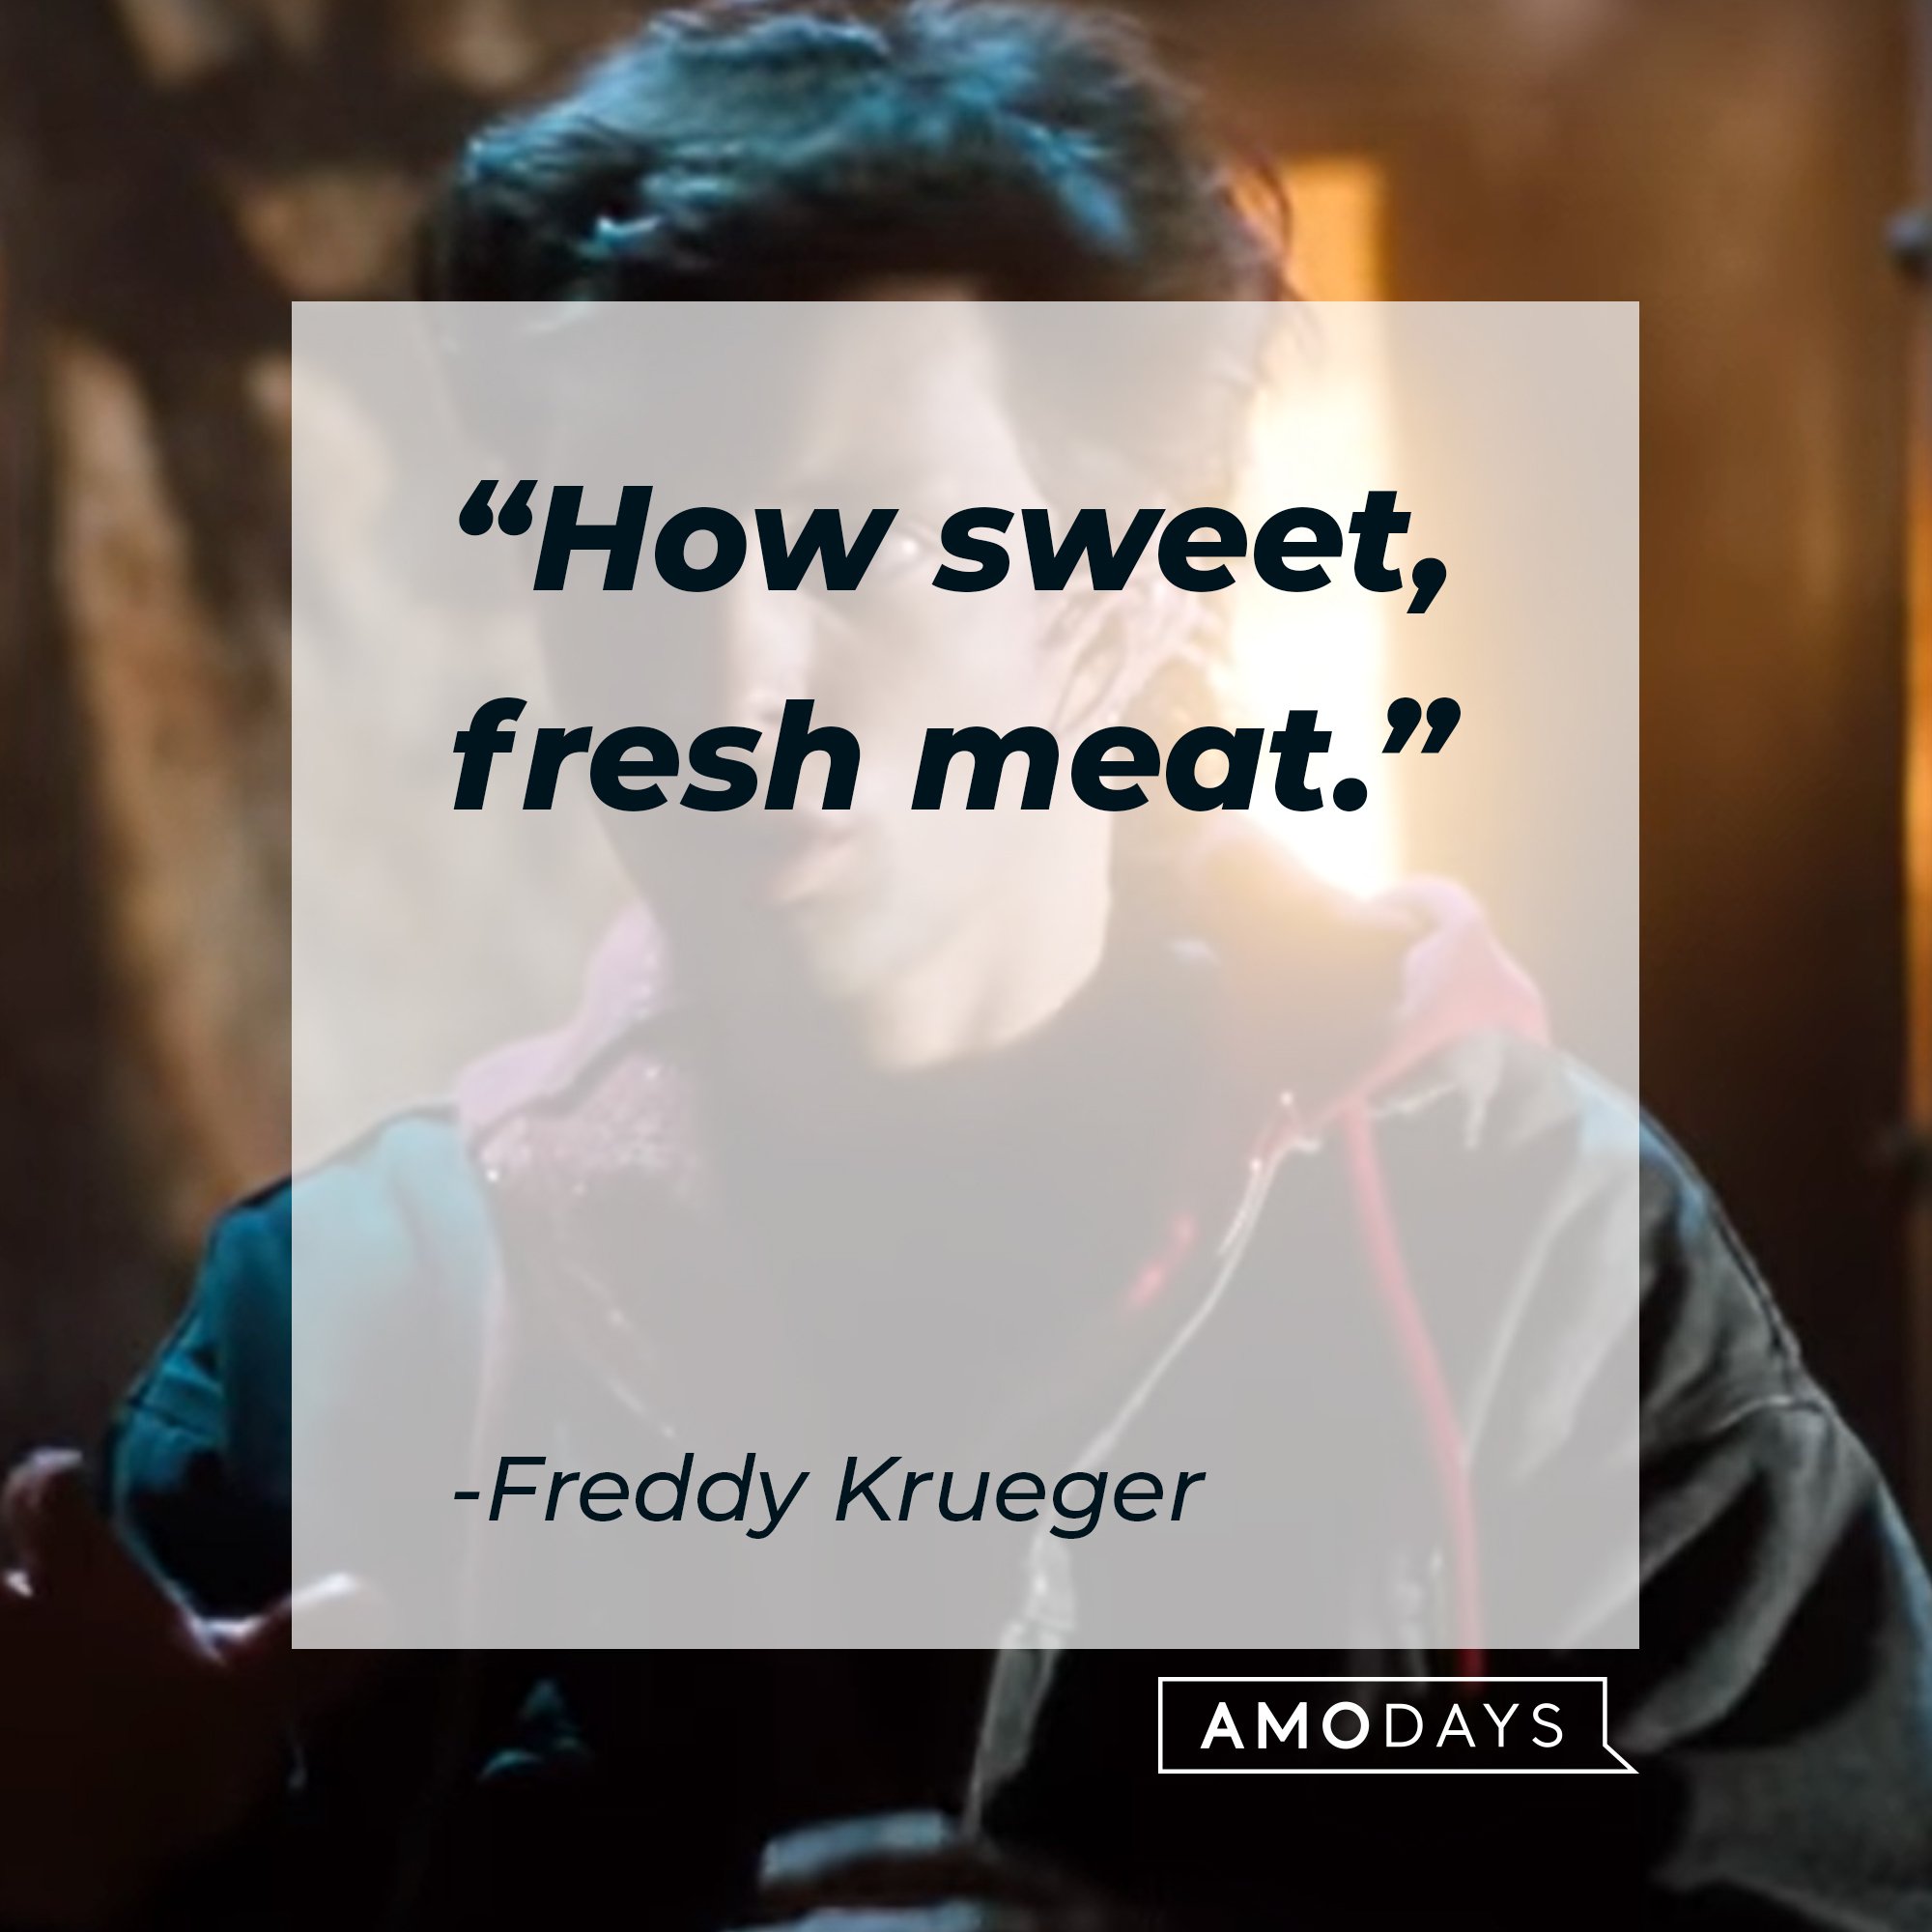 Freddy Krueger’s quote: "How sweet, fresh meat." | Image: AmoDays